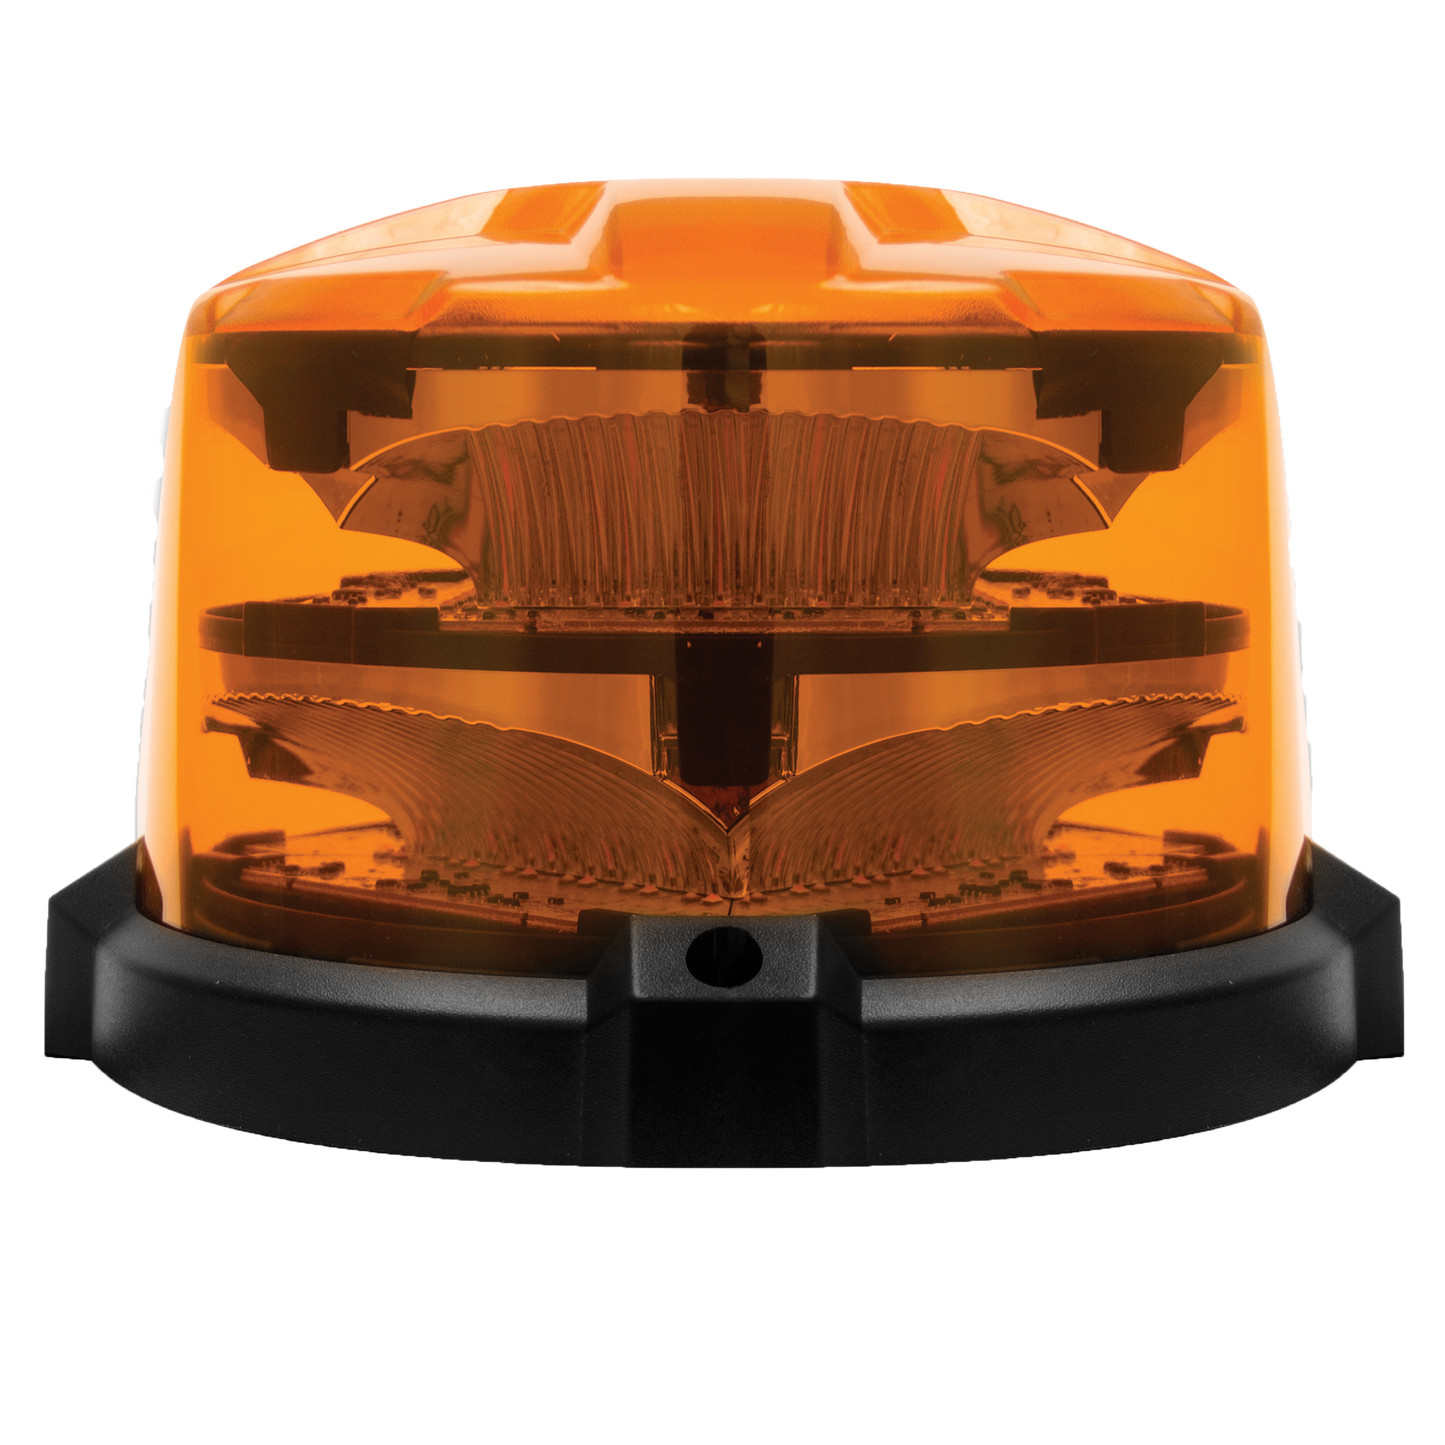 Soundoff Signal PNRBCDMLA Low Dome For Nroads® Beacons - Amber